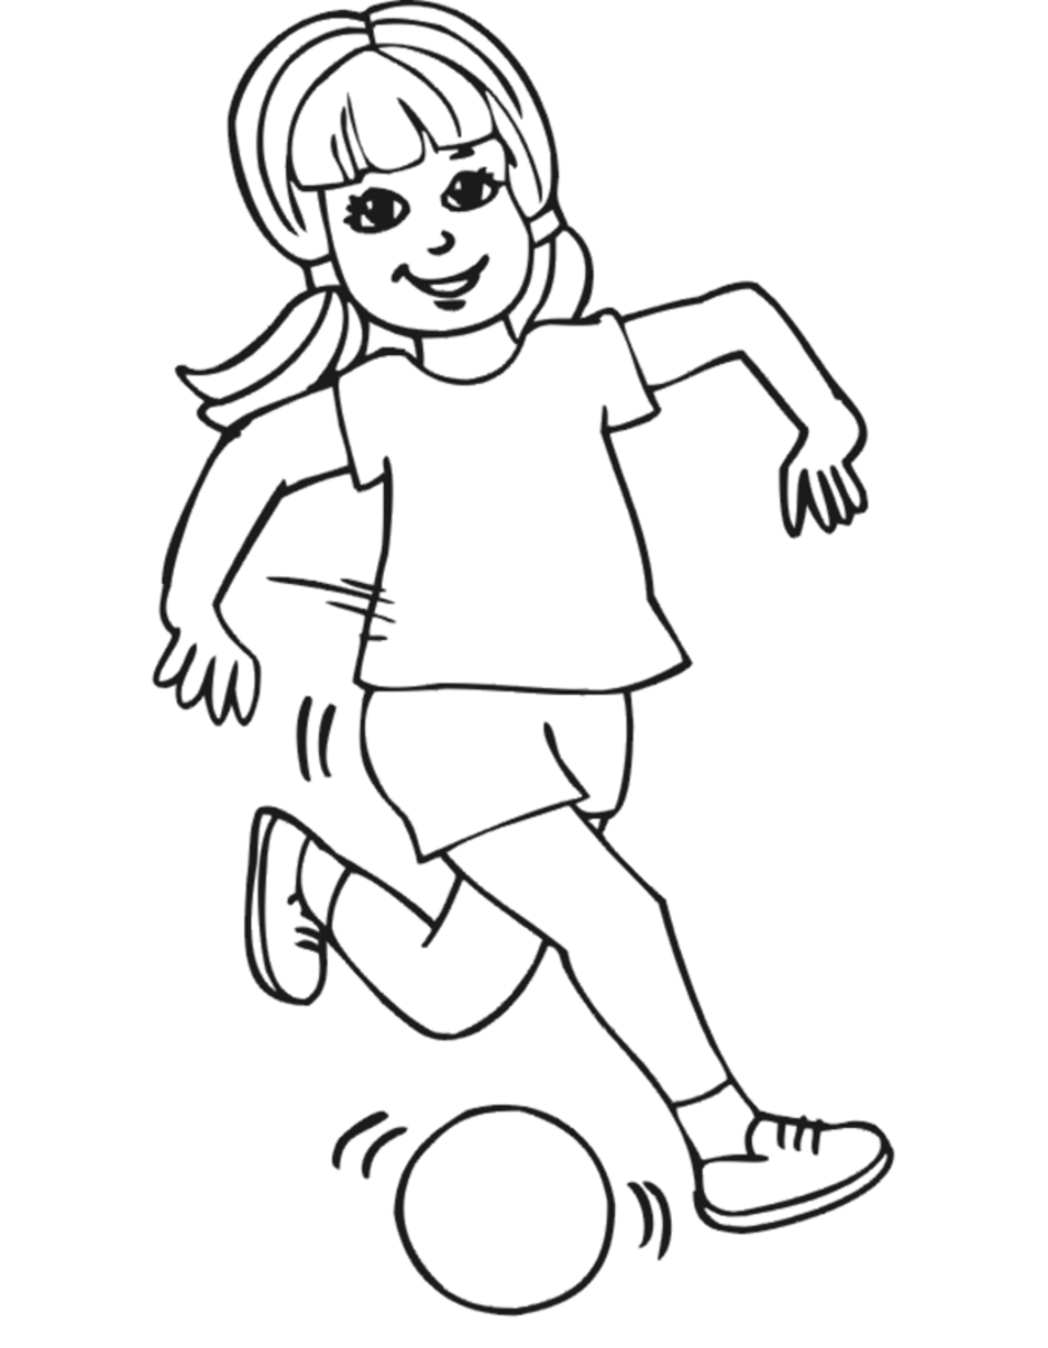 Little Girl #96522 (Characters) – Printable coloring pages